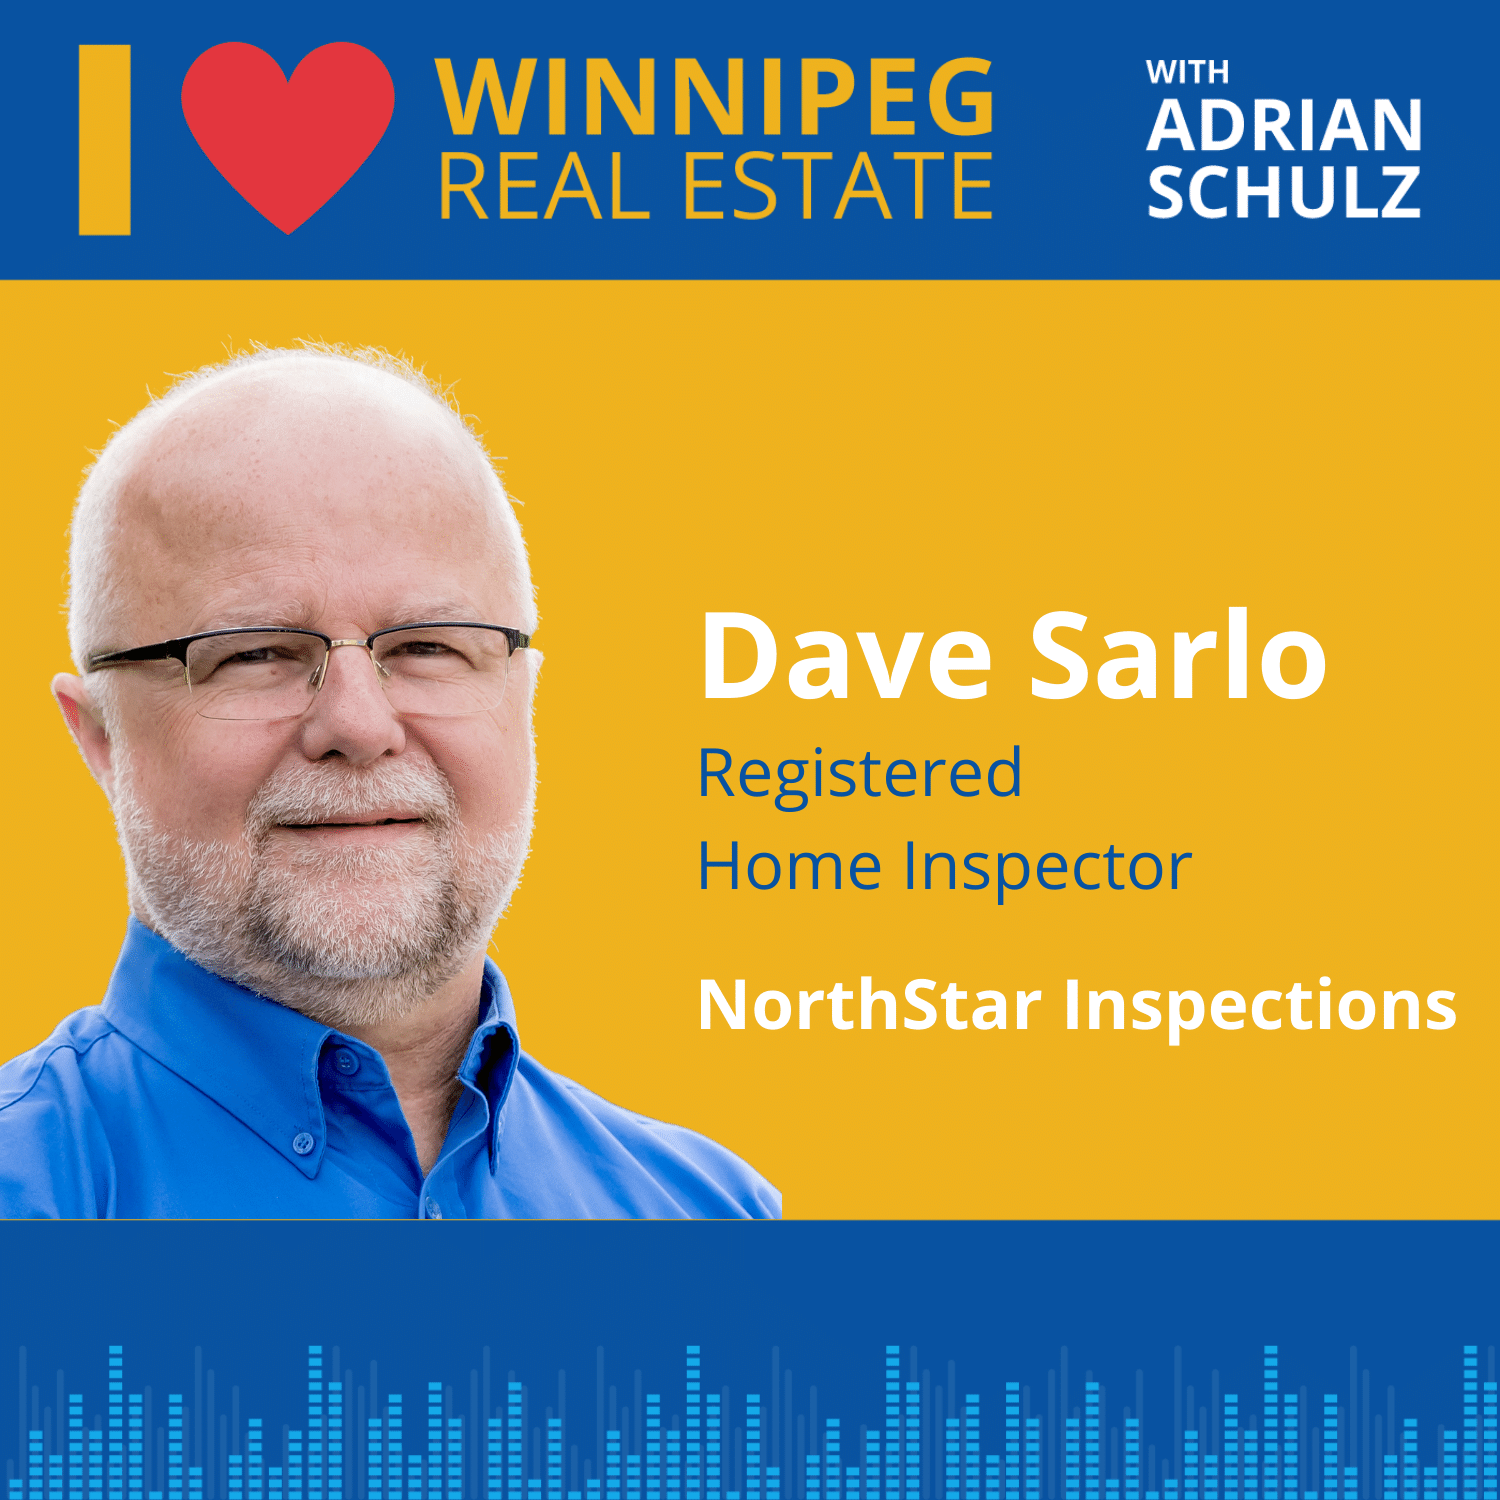 Dave Sarlo on home inspections in Winnipeg Image